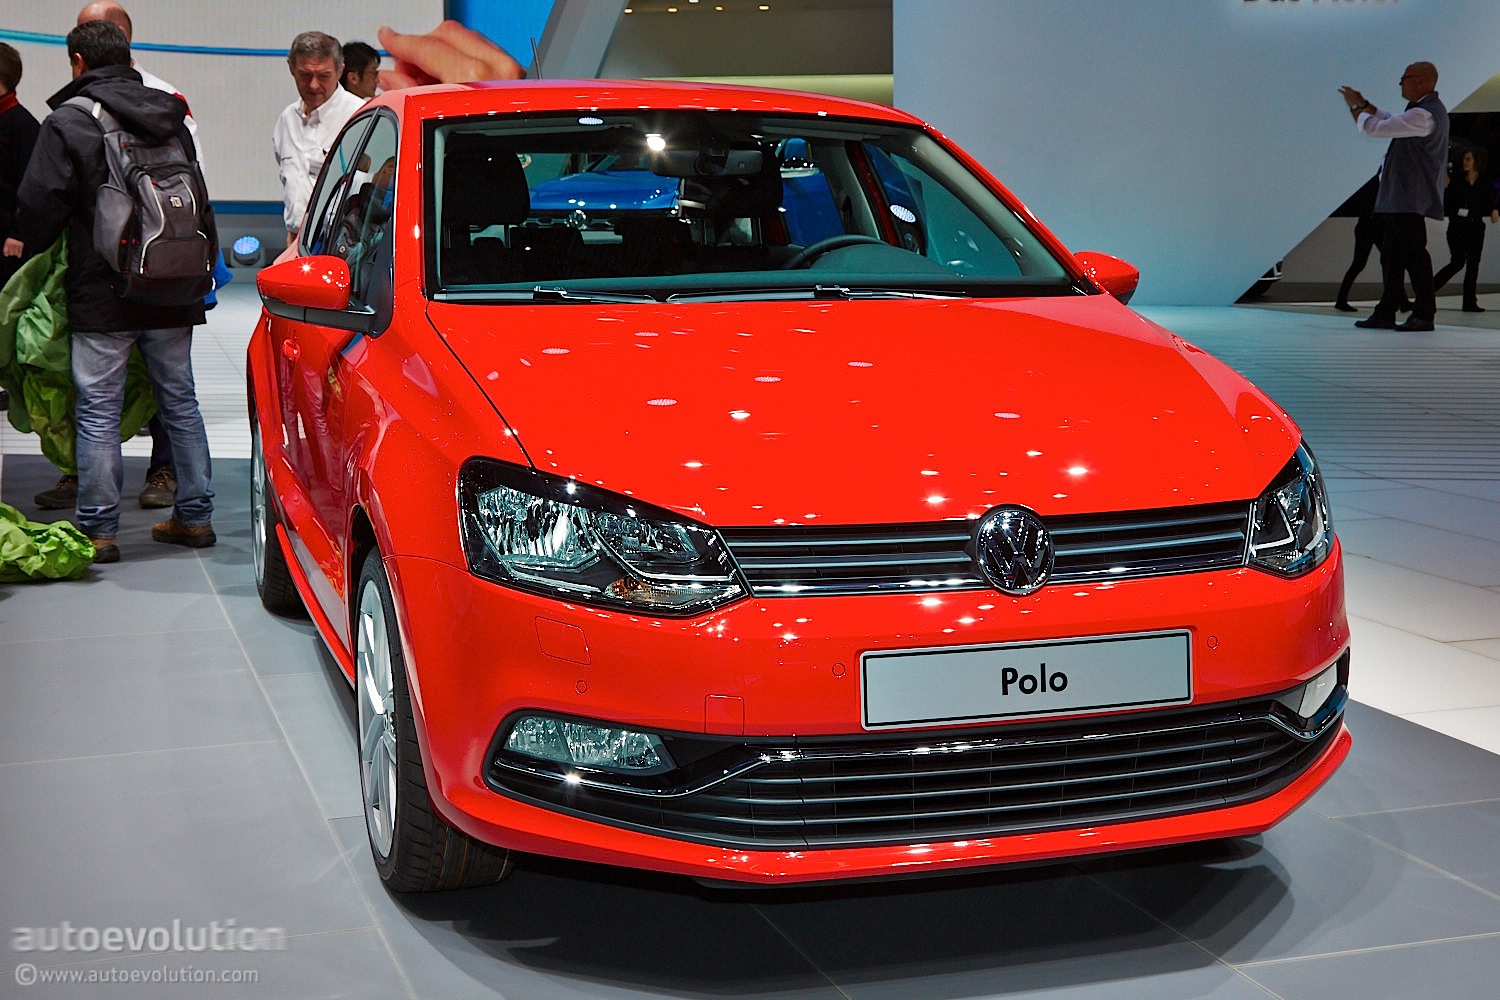 VOLKSWAGEN LAUNCHES THE SASSY NEW POLO